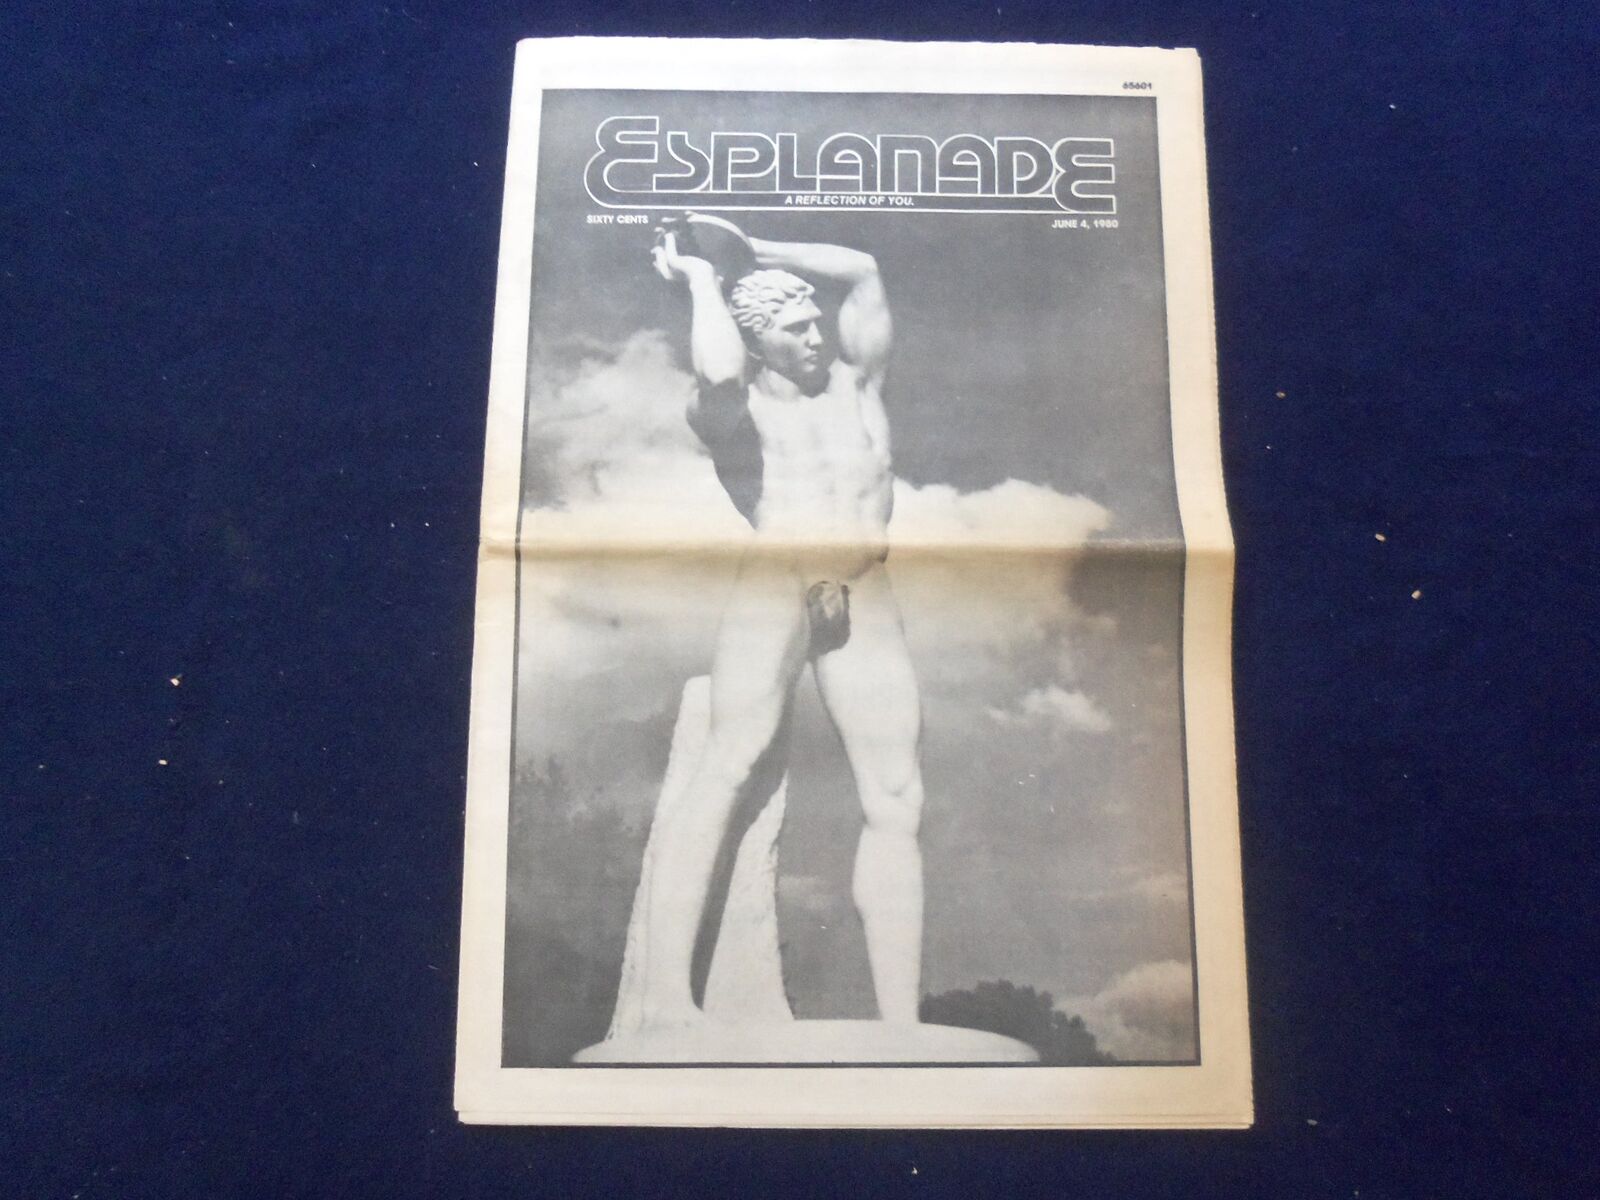 1980 JUNE 4 ESPLANADE NEWSPAPER - THE TOP 10 WORST SINGLES OF ALL TIME - NP 6833